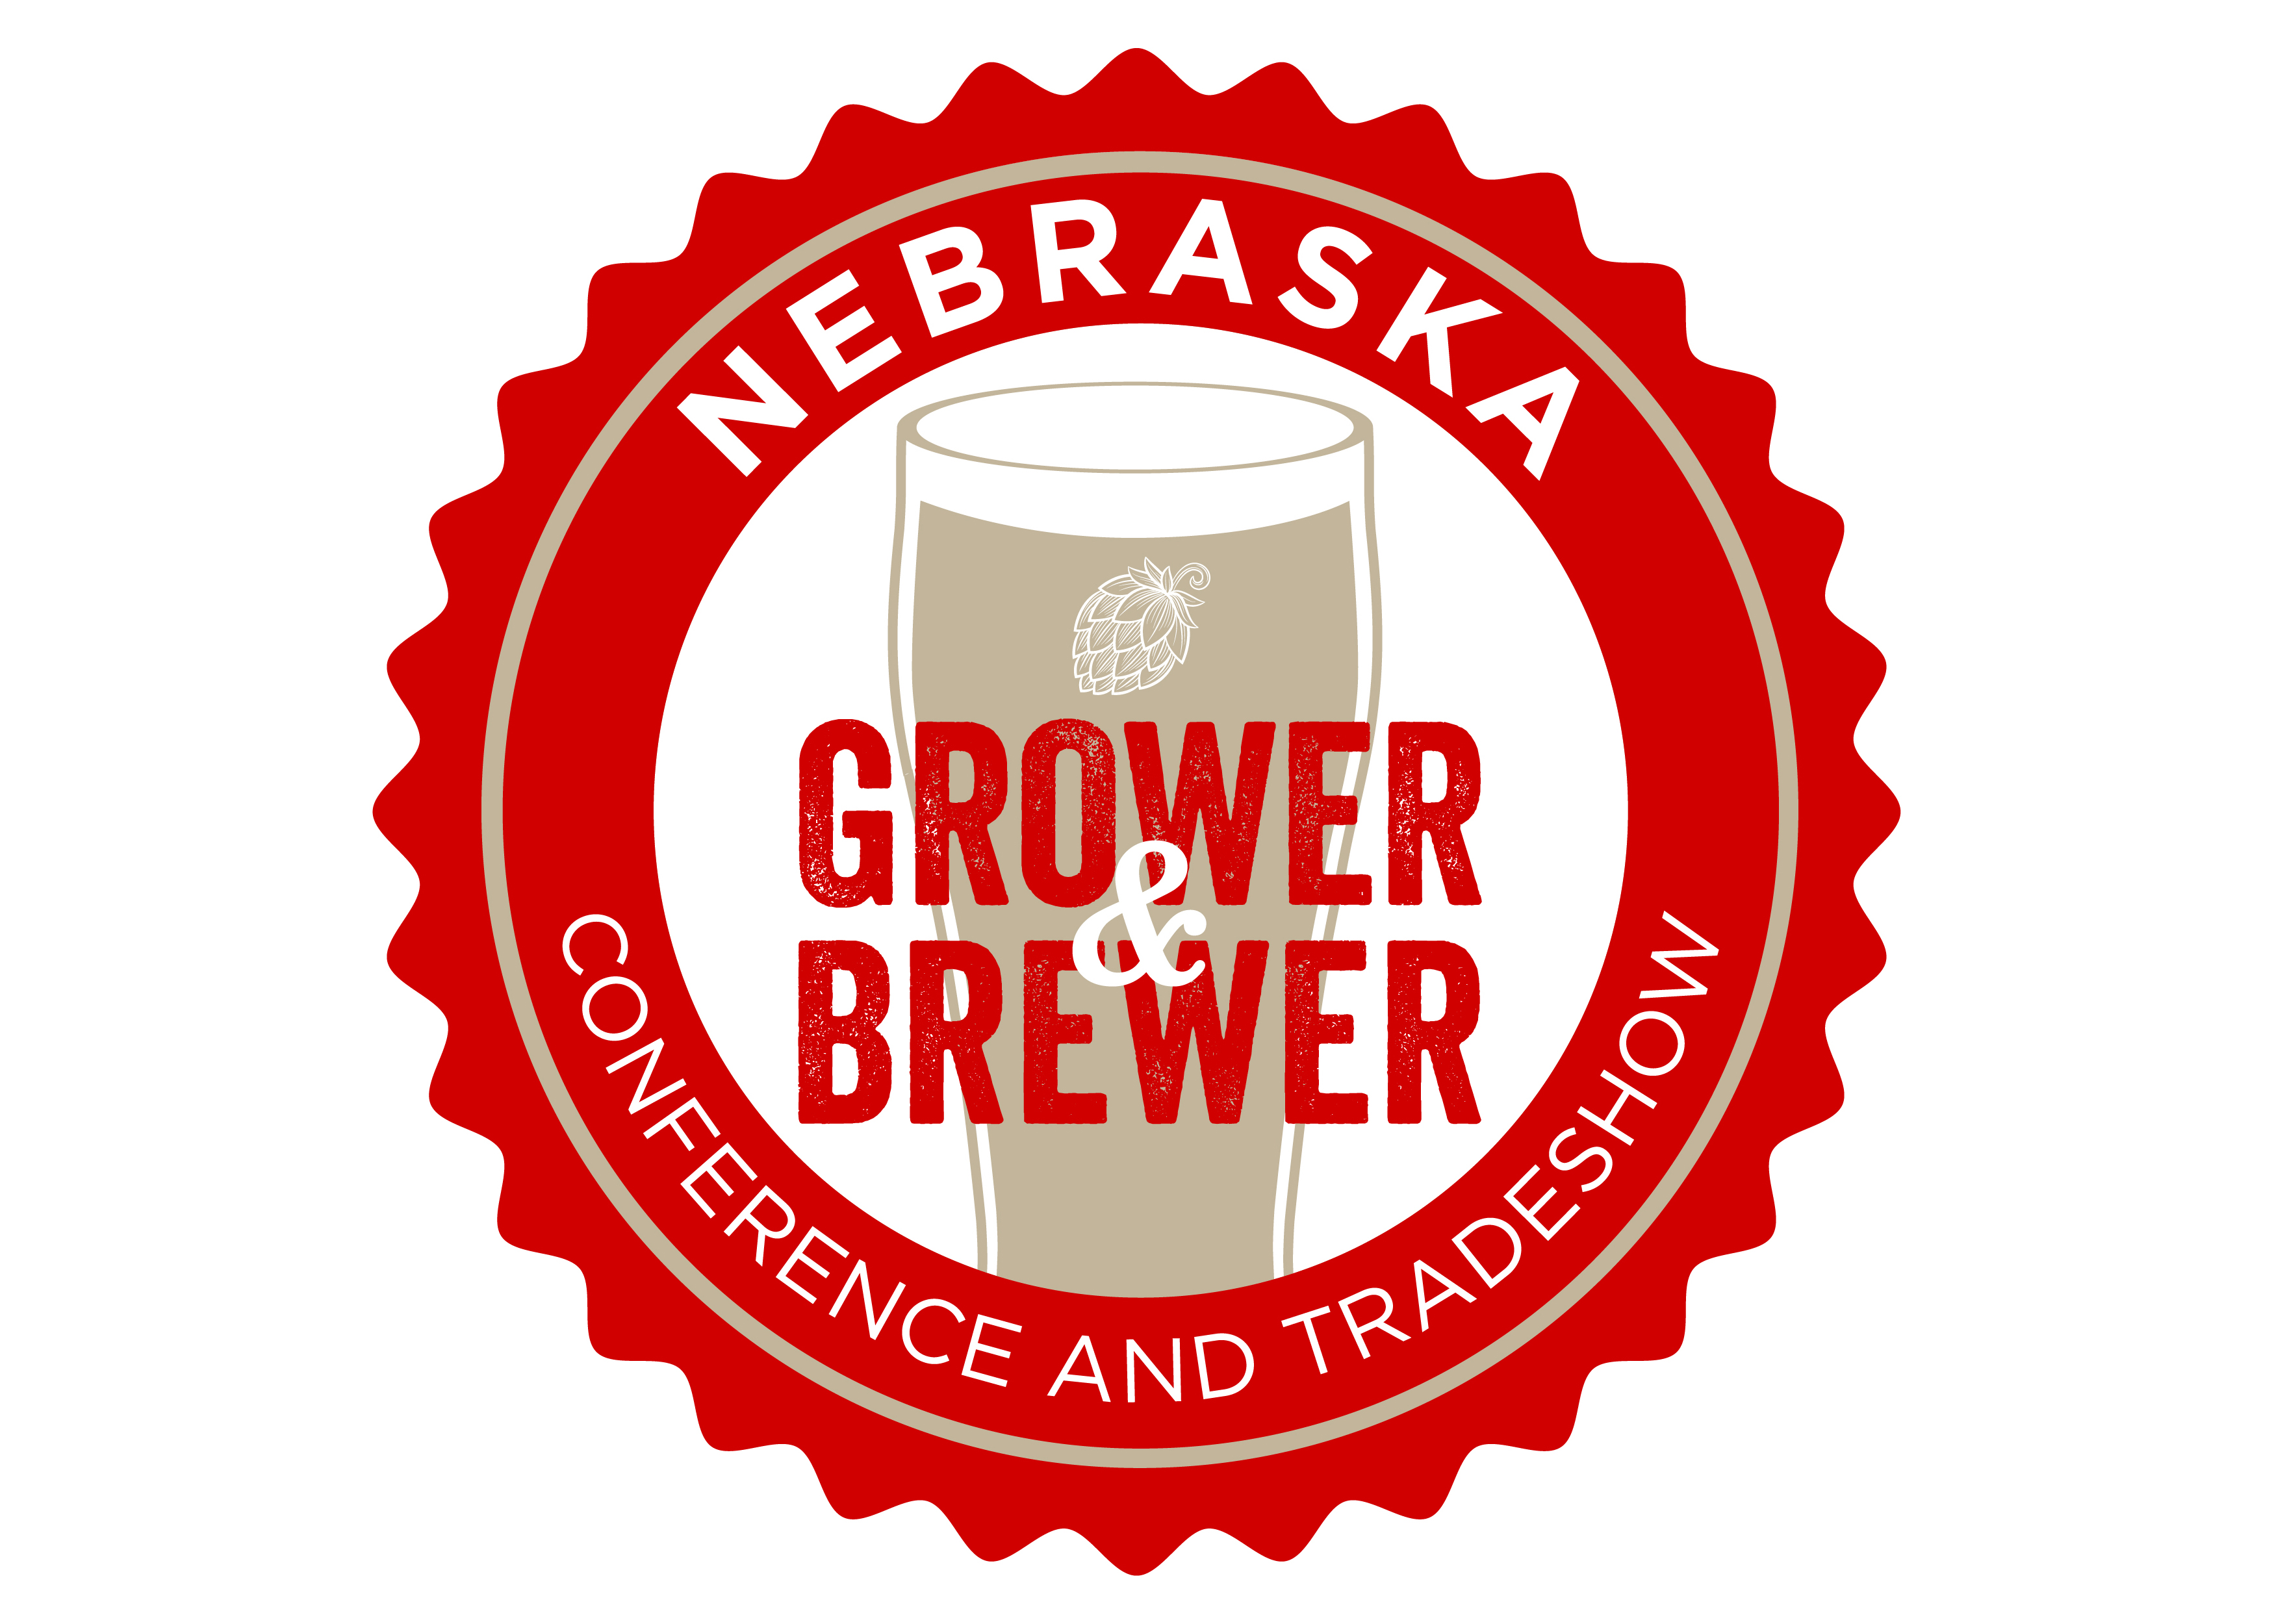 University of Nebraska–Lincoln Extension will host the third annual Nebraska Grower and Brewer Conference and Trade Show Jan. 13-14 in Lincoln.